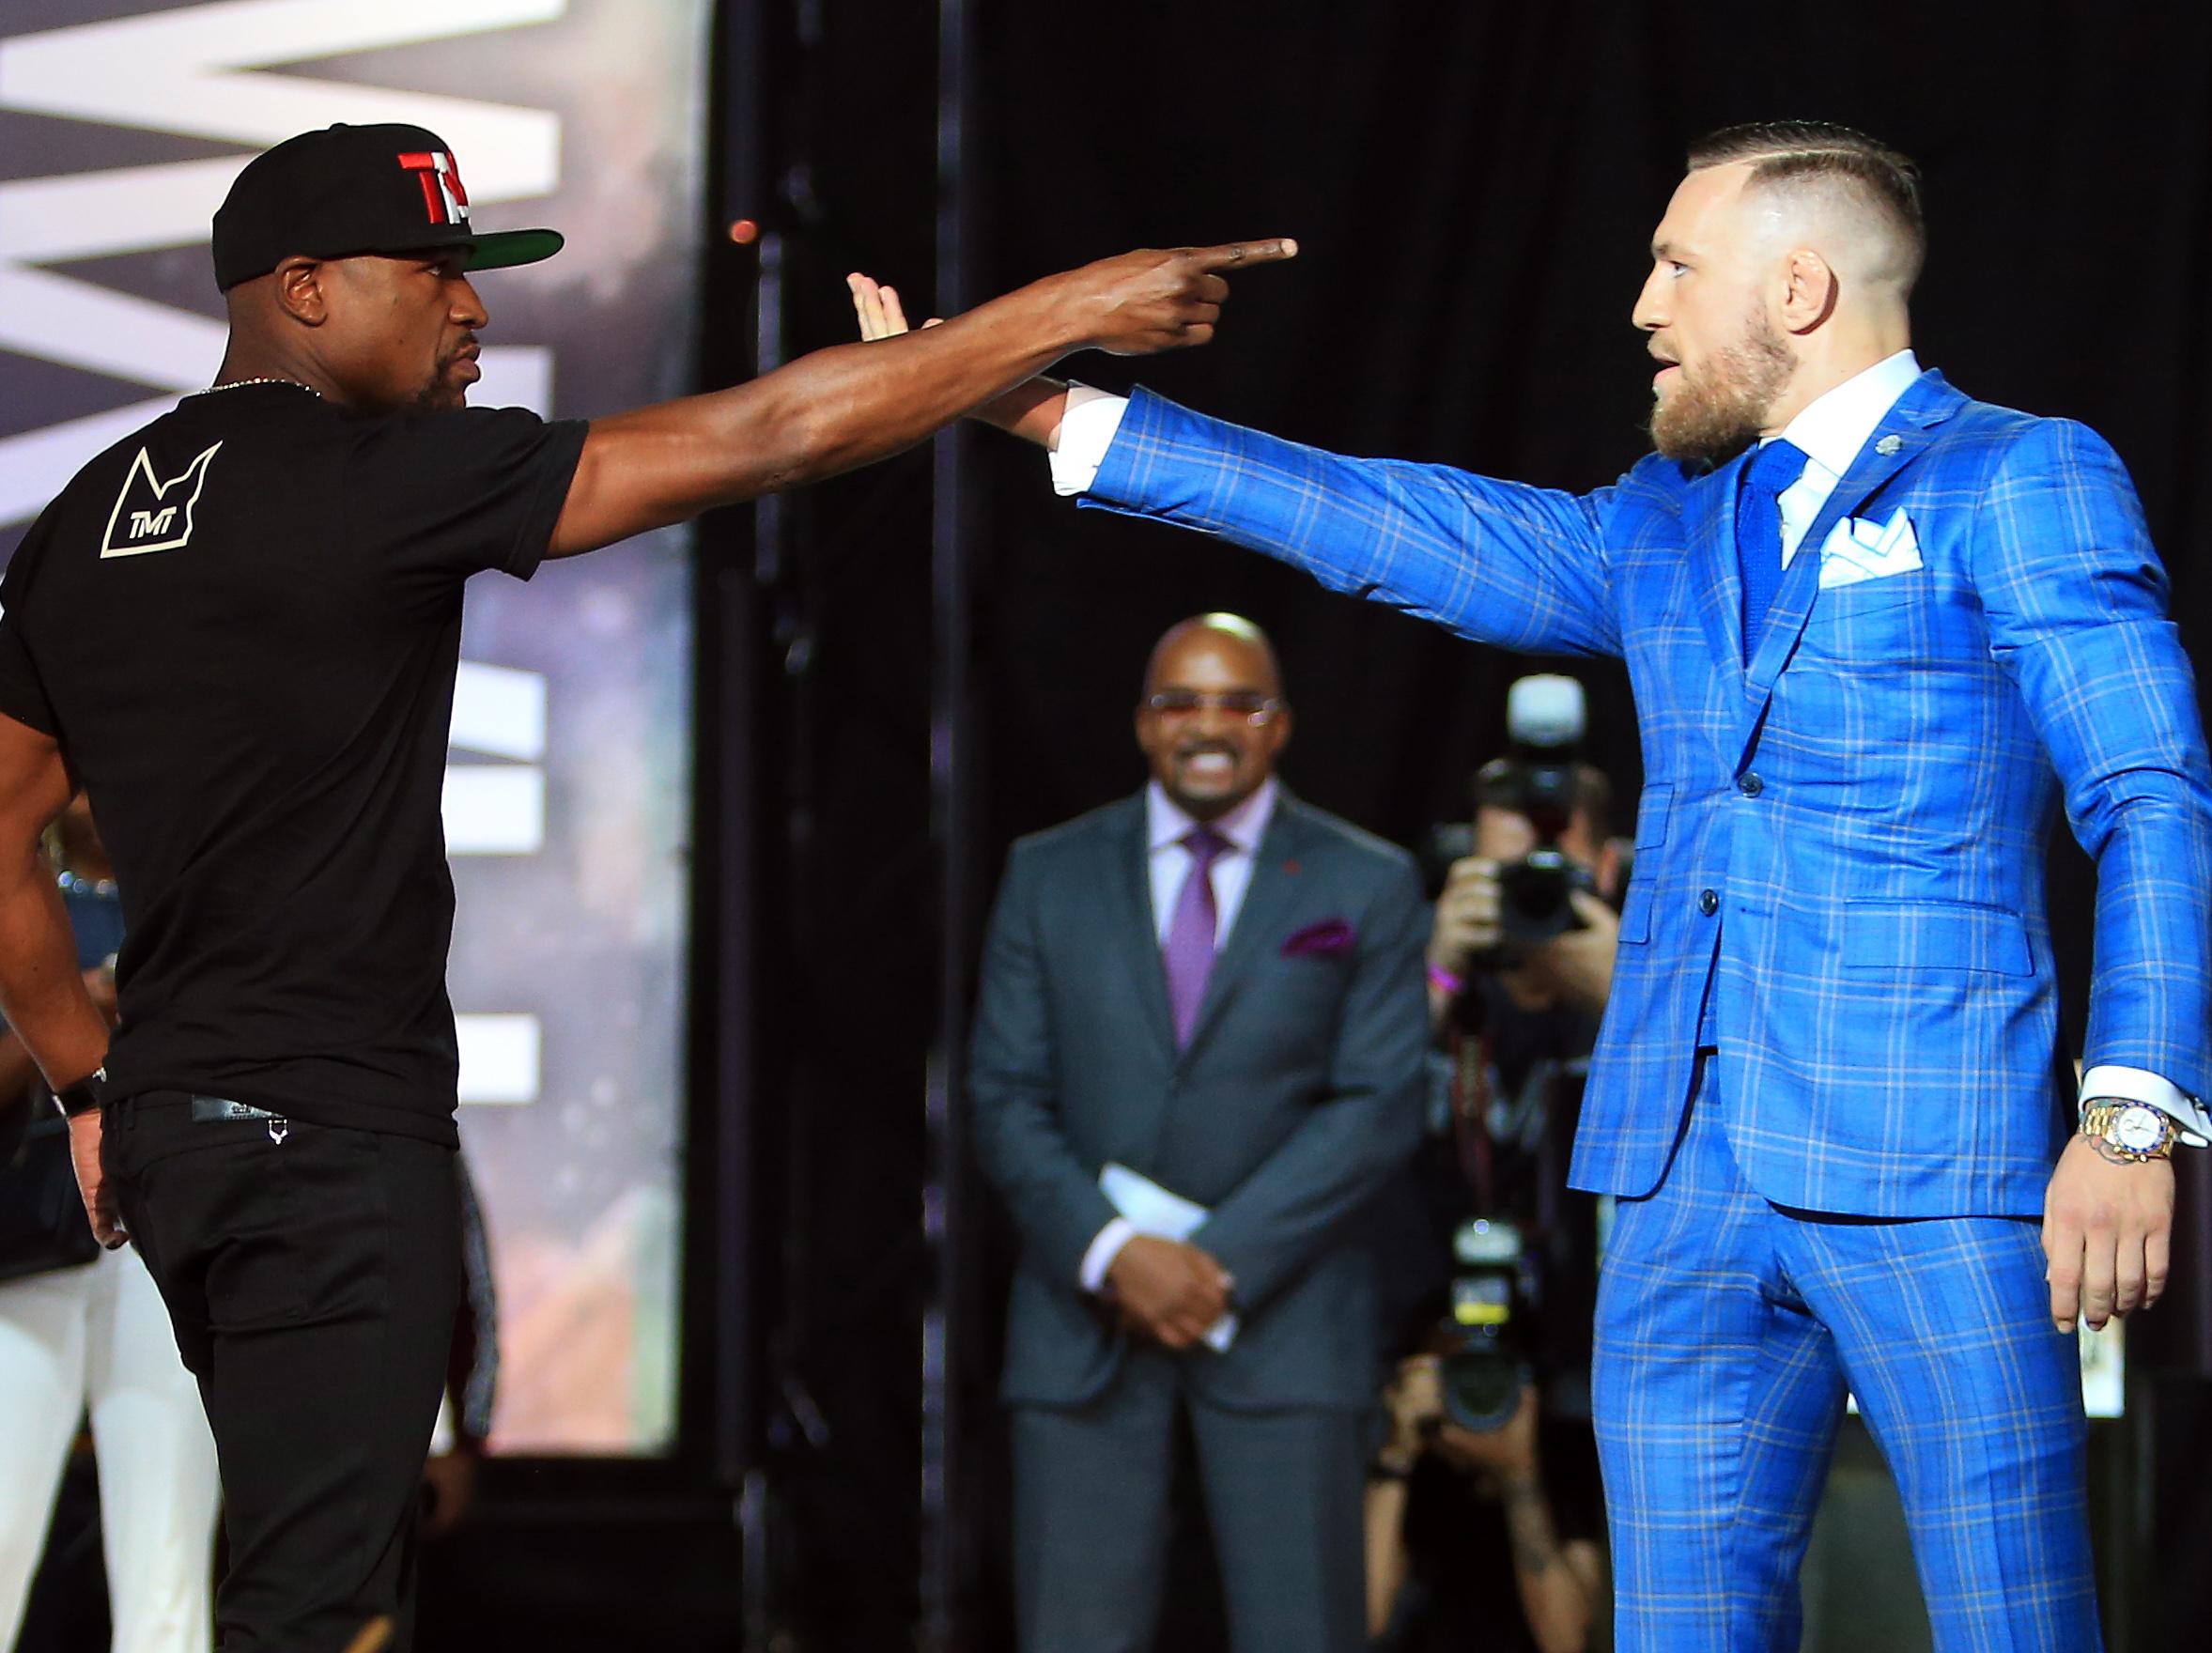 McGregor has used racially-charged insults about his opponents